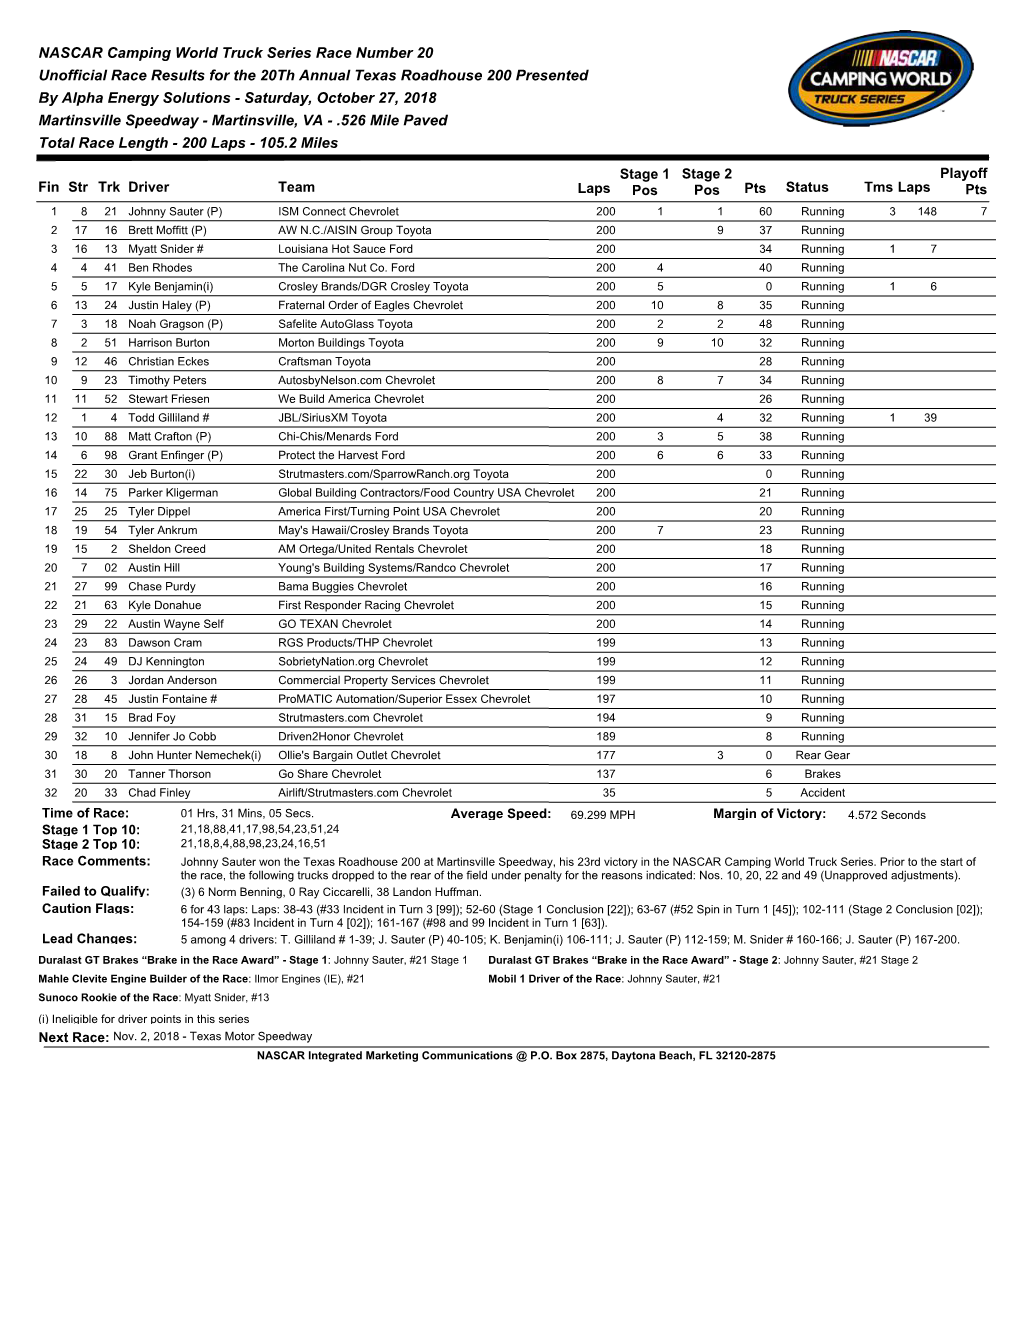 NASCAR Camping World Truck Series Race Number 20 Unofficial Race Results for the 20Th Annual Texas Roadhouse 200 Presented by Al